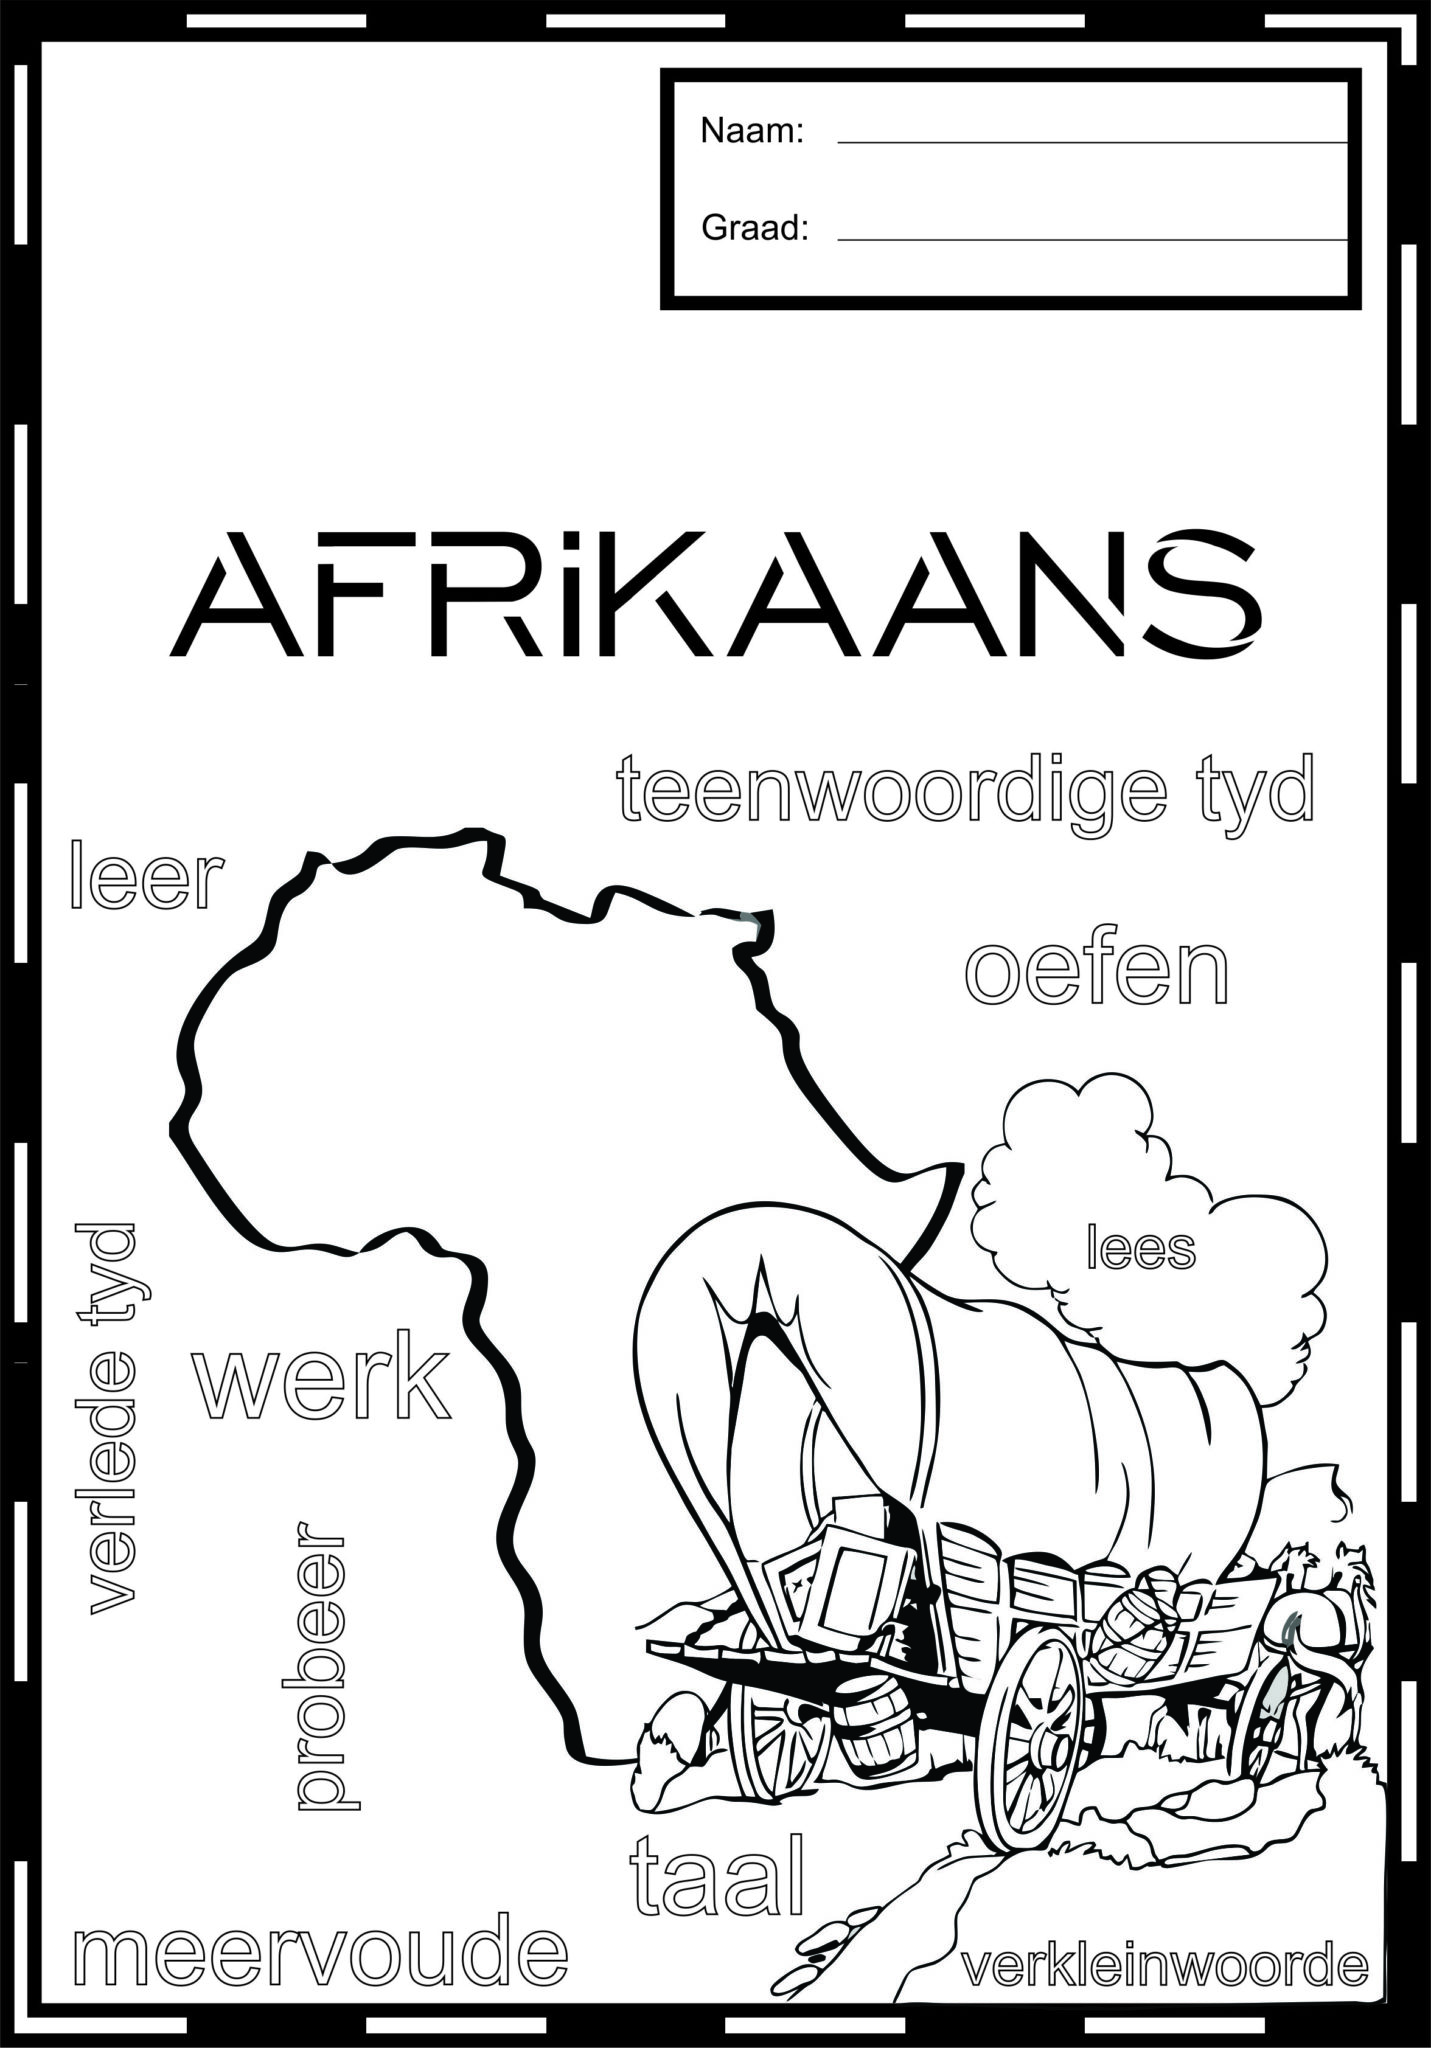 book review examples in afrikaans